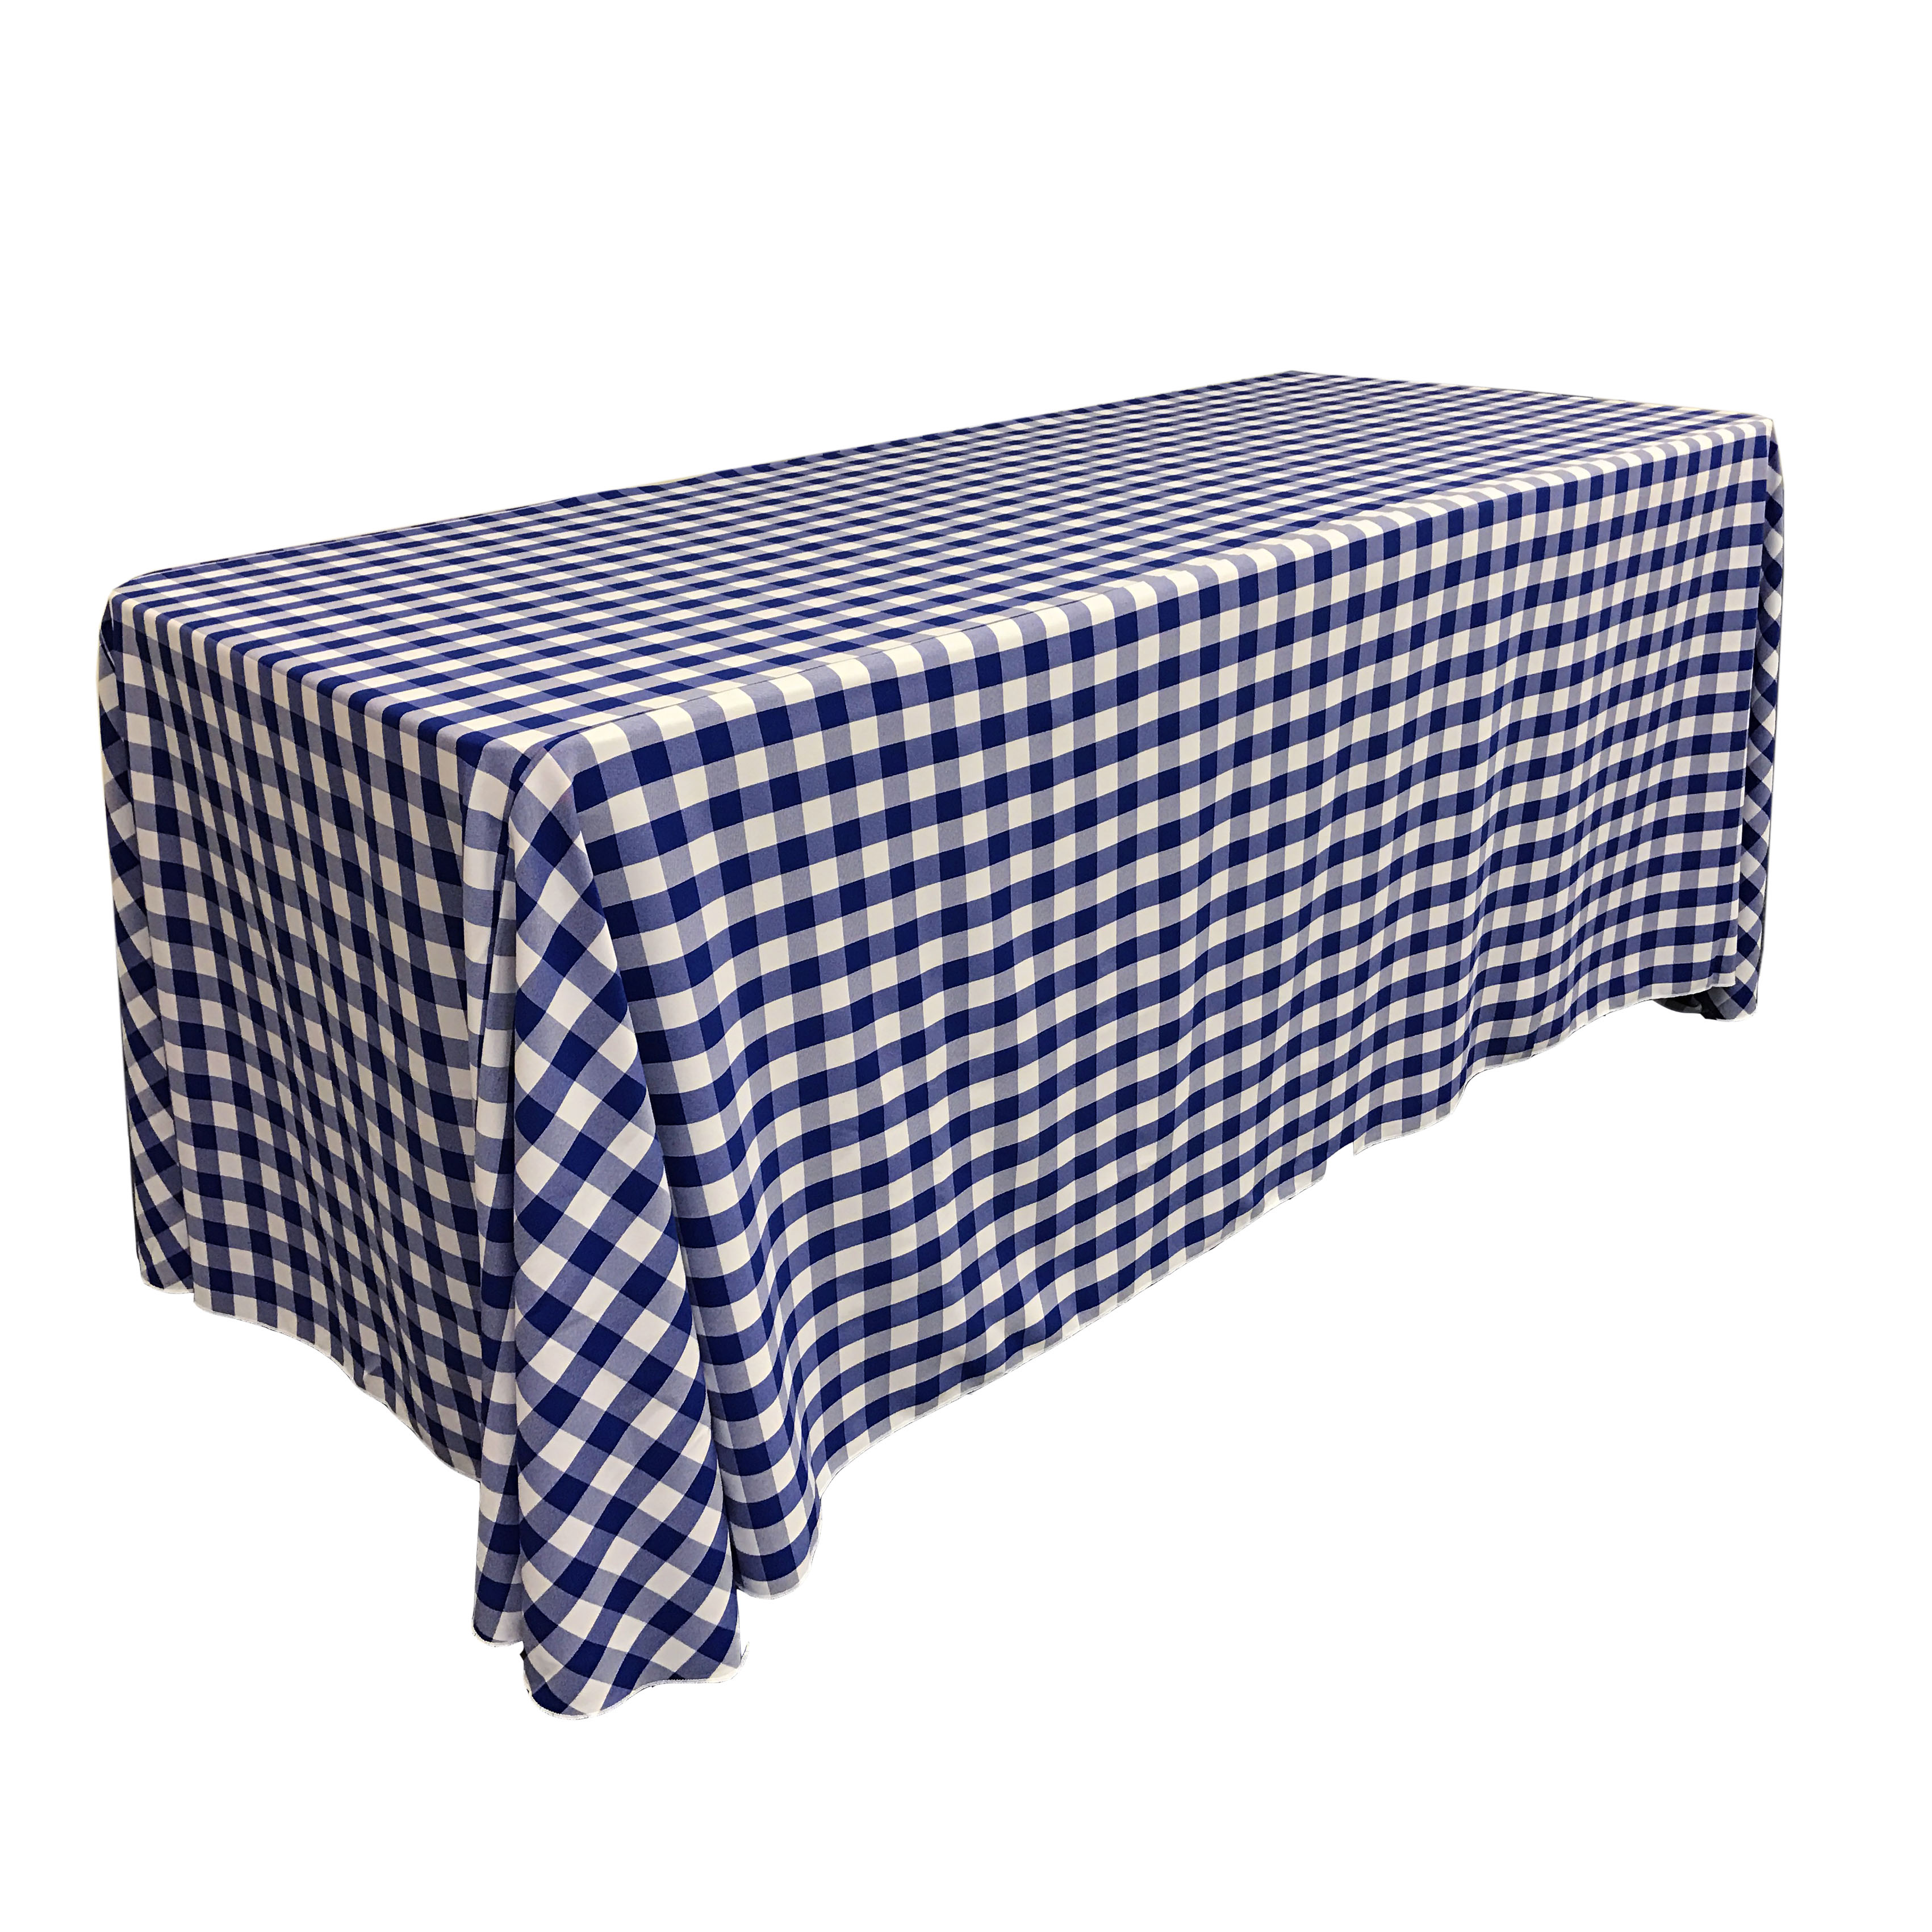 LA Linen Gingham Checkered 90"x156" Rectangular Tablecloth, White and Royal Blue